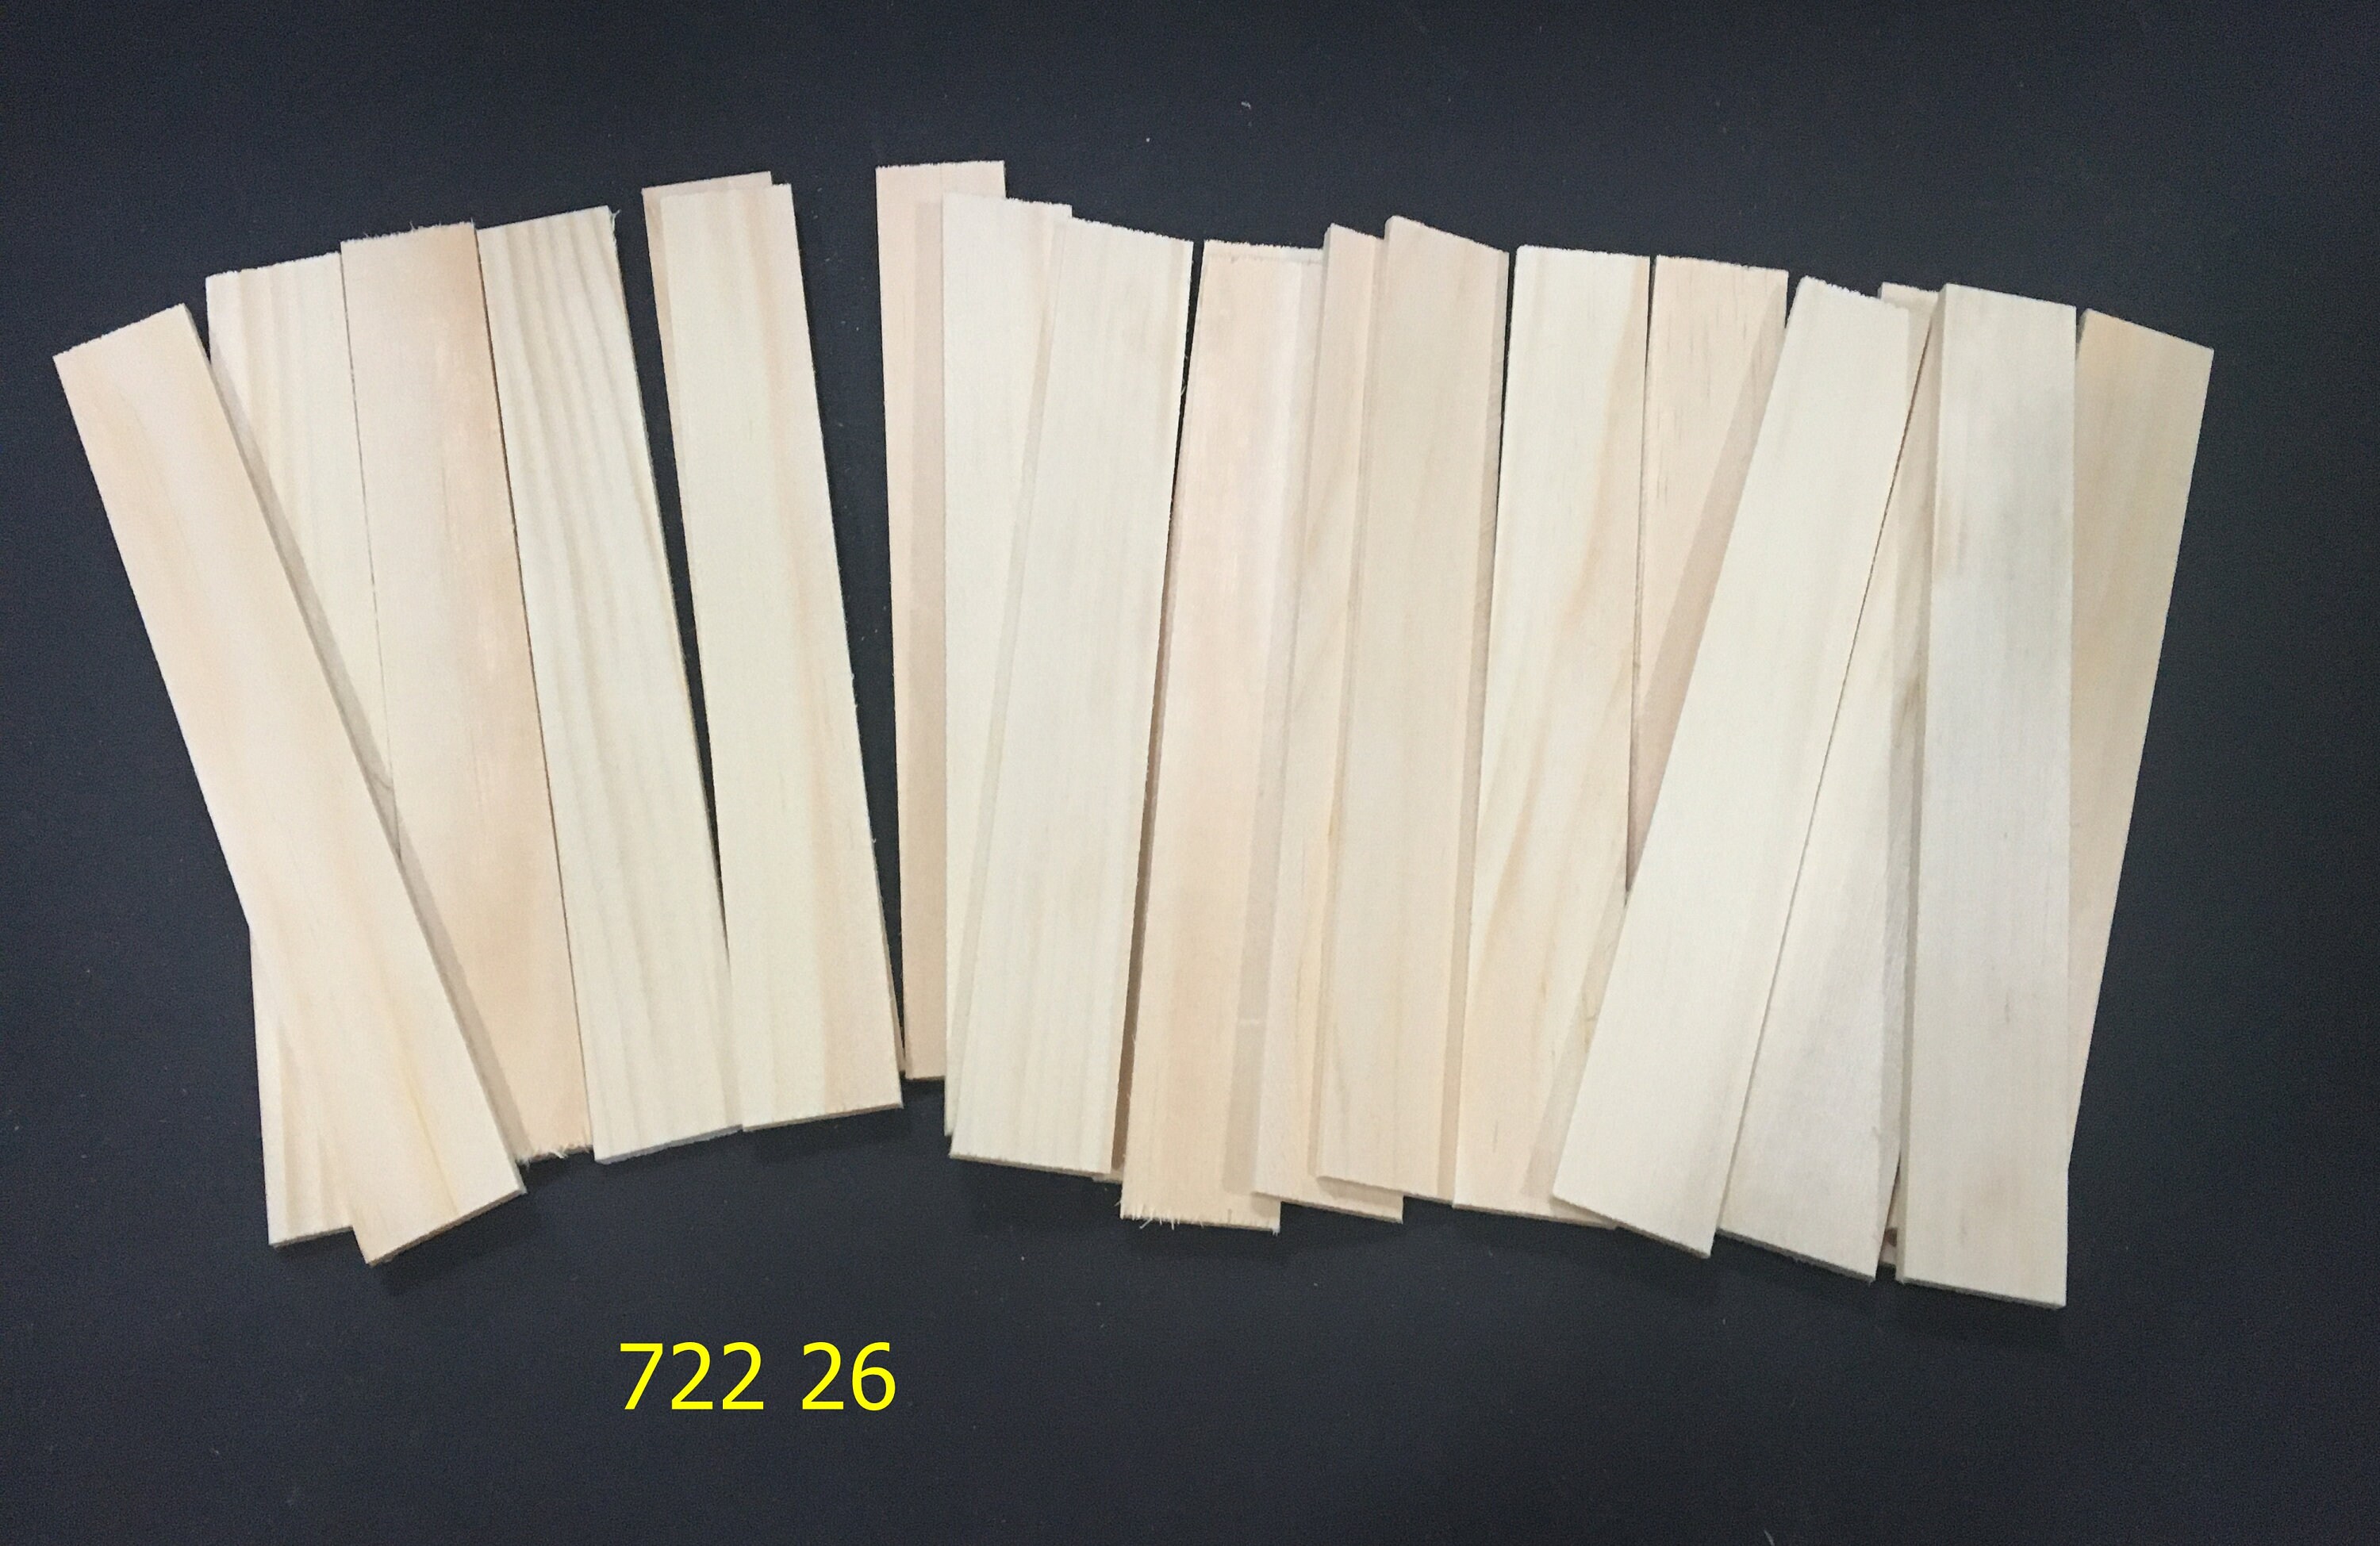 100x Unfinished Wood Sticks, Small Woodcrafts Hardwood Strips, for Crafts Home Decoration Model Toys Building Carving Supplies Accessories 250cm, Size